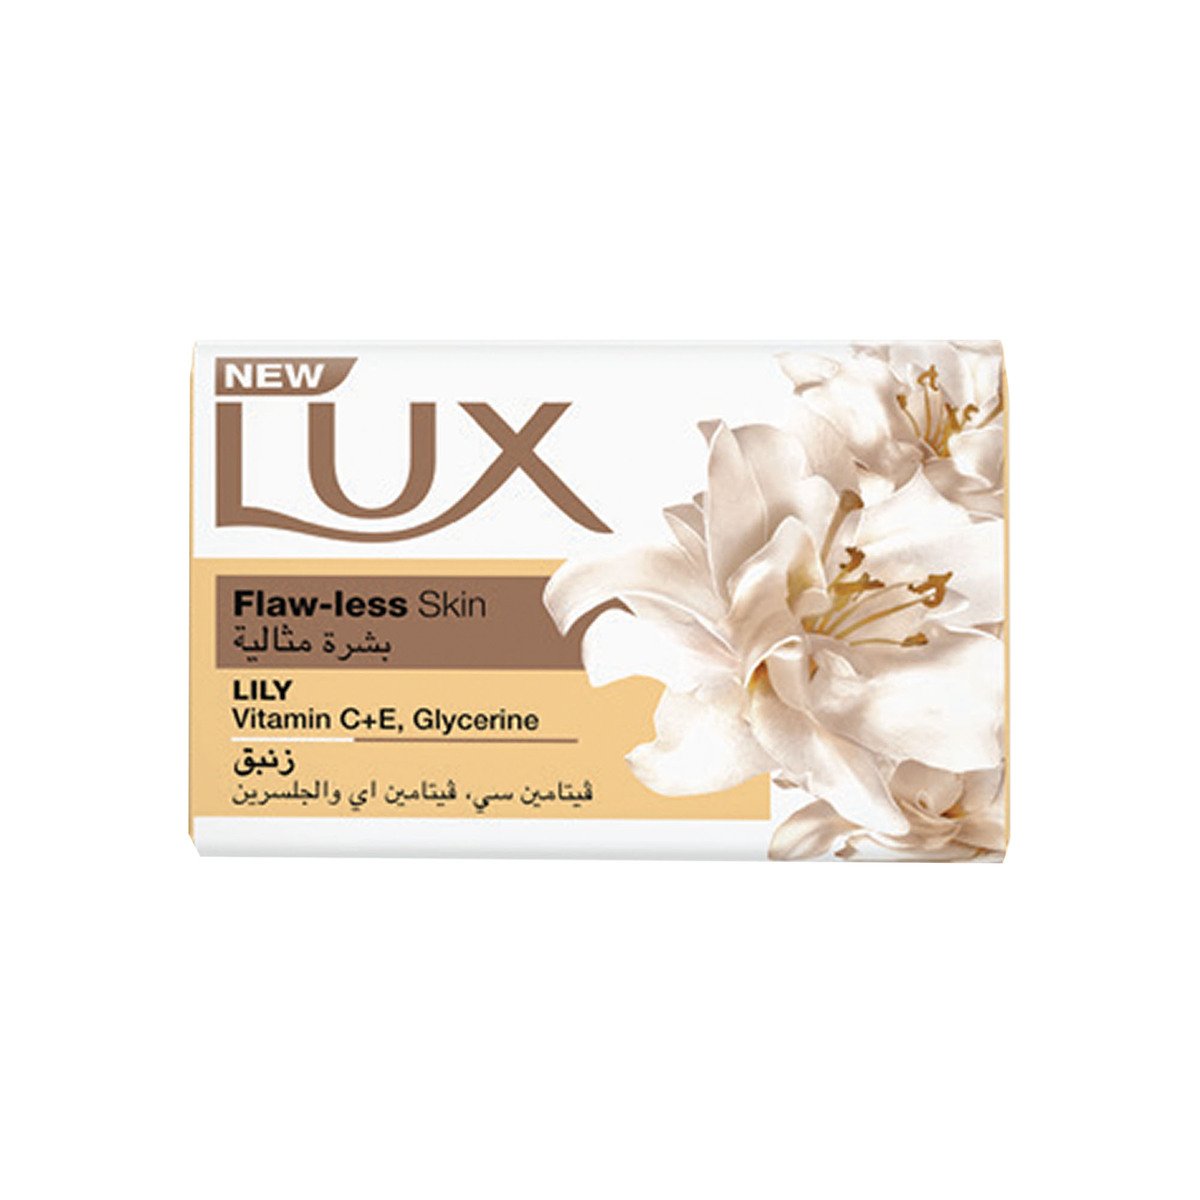 Lux Flawless Lily Bar Soap 120 g 5+1